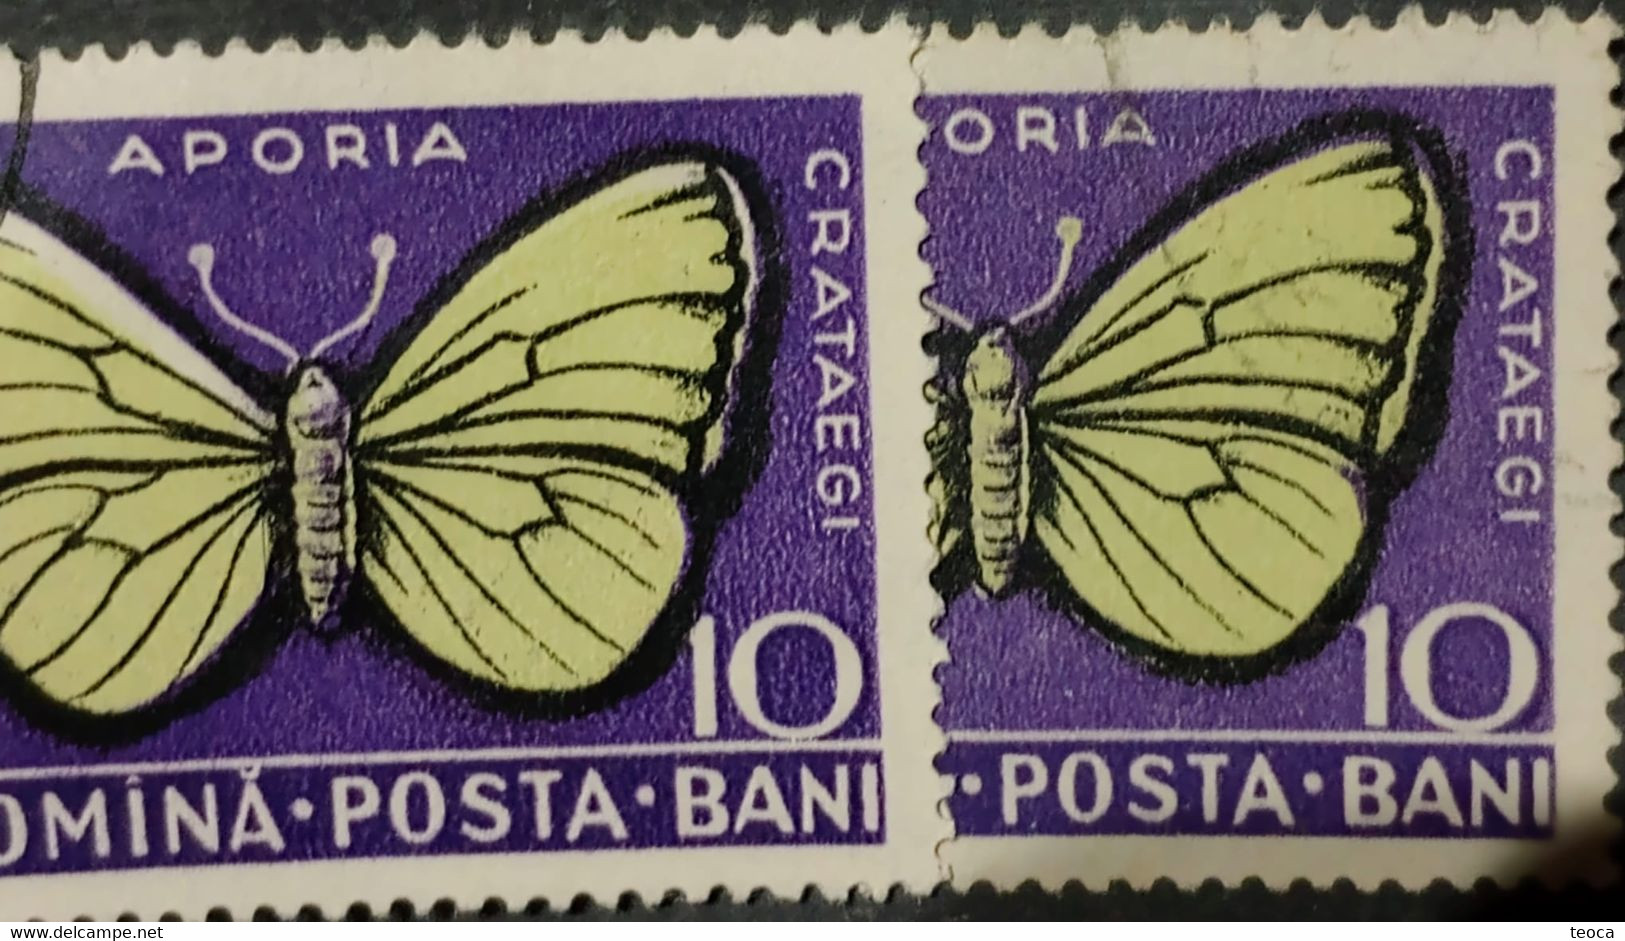 Errors Romanua 1956 MI 1586 Printes With Butterfly Wings Displaced From The Frame, Butterfly Displaced  In Im Butterfly - Abarten Und Kuriositäten